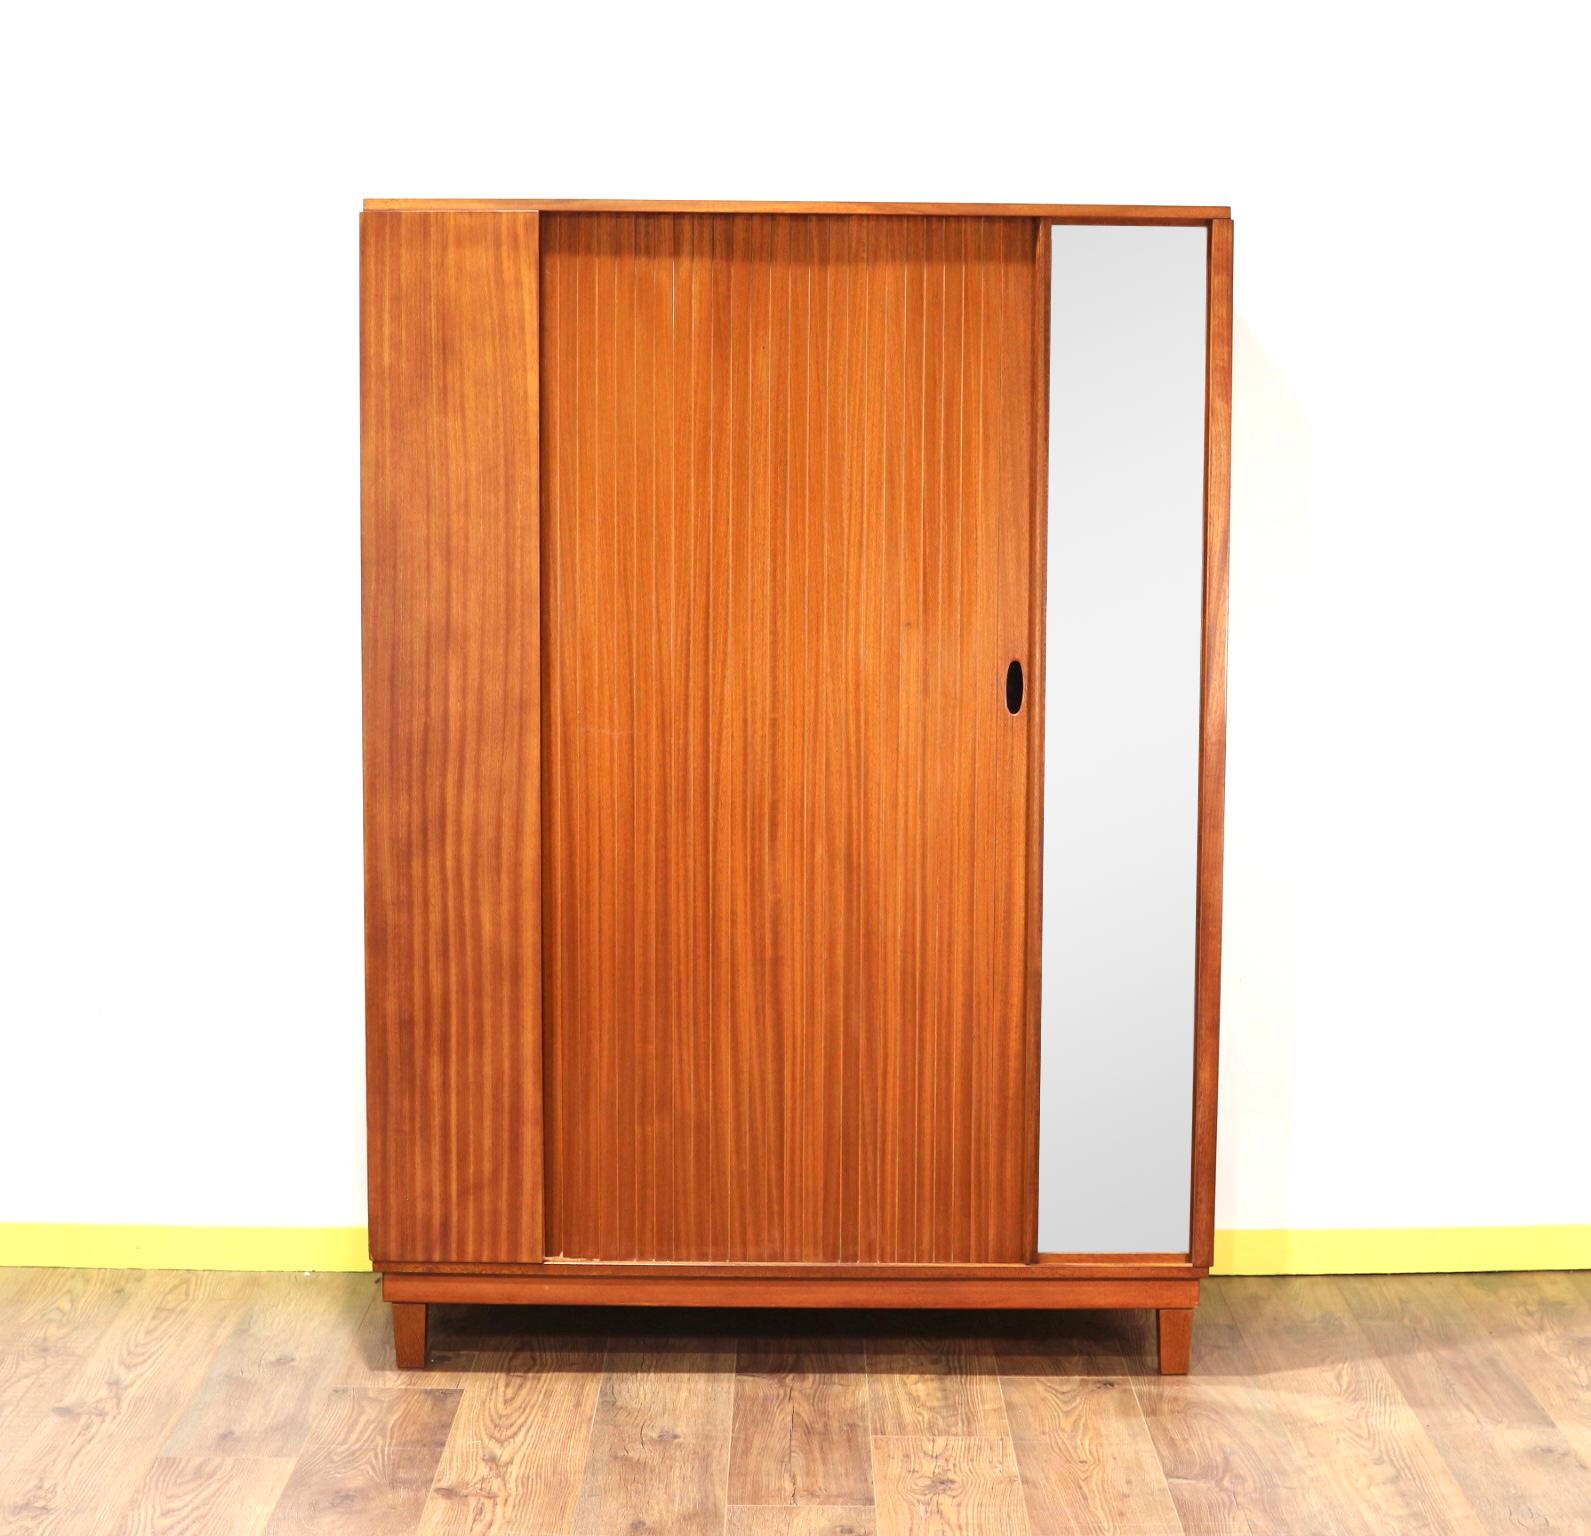 A fantastic example of mid century style. This fantastic armoire by British furniture maker, Austinsuite would take pride of place in any bedroom. The tambour door is a really eye catcher and the mirror is a useful add on.